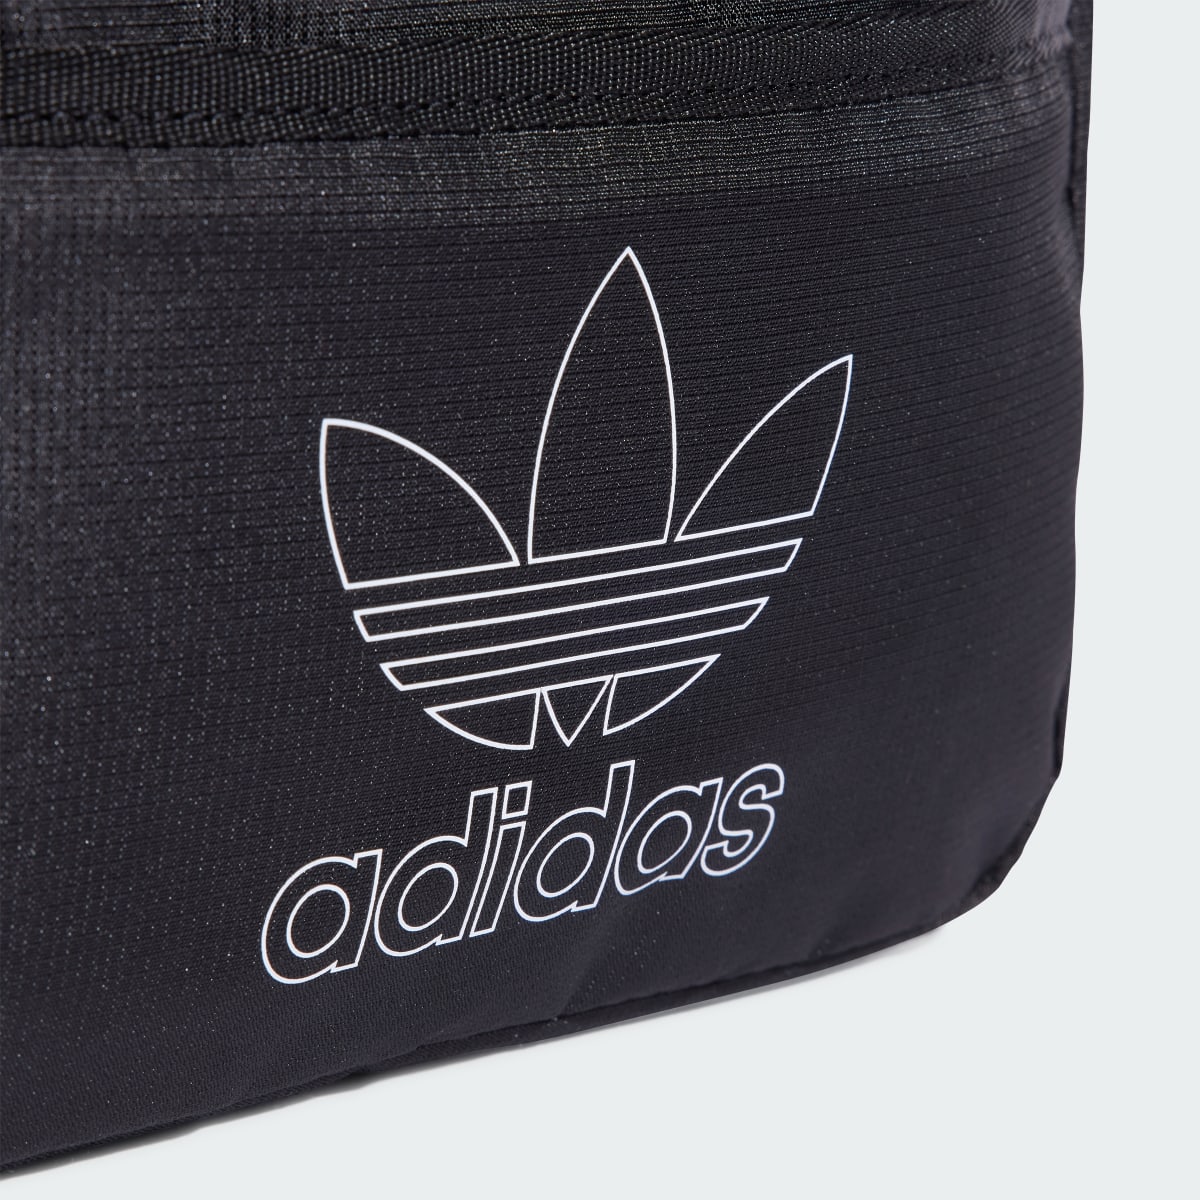 Adidas Small Airliner Tasche. 6